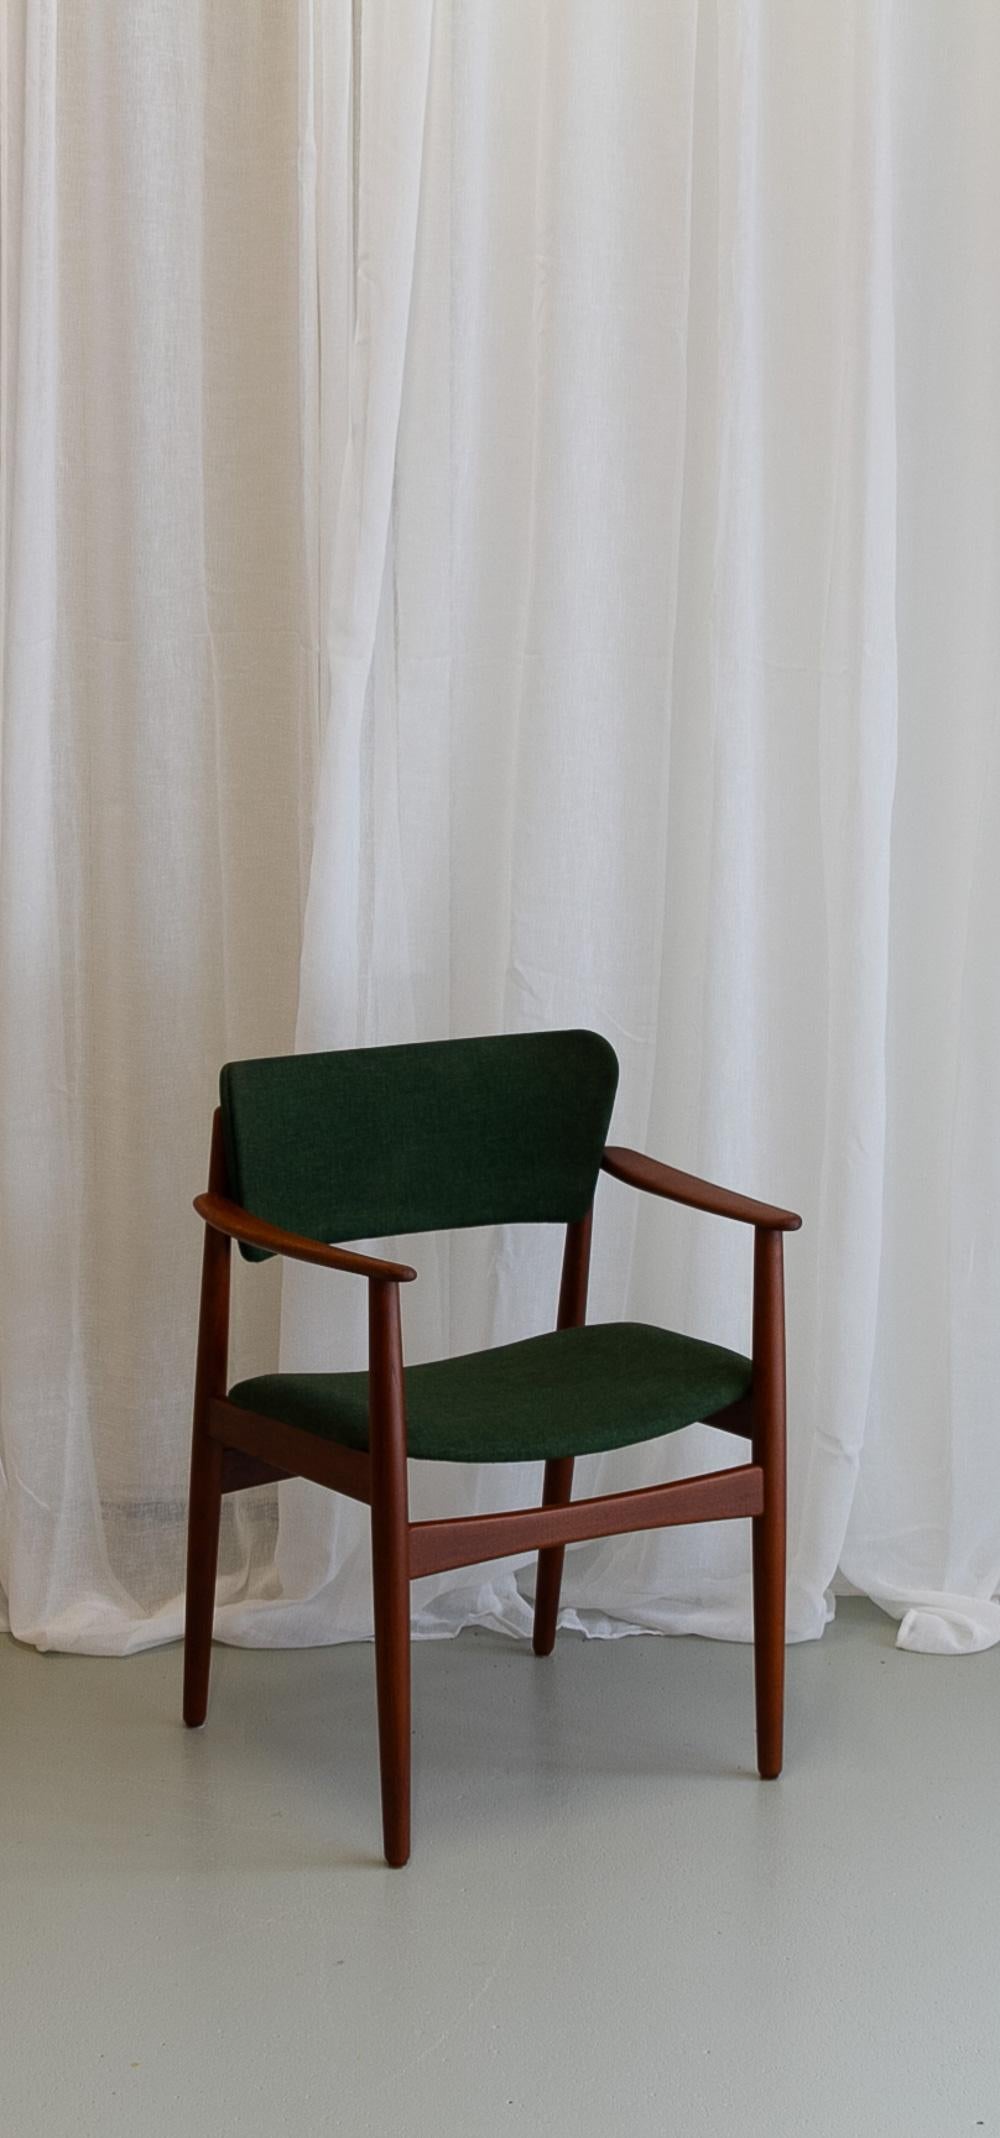 Danish Modern Teak Armchair with Green Wool, 1960s.

Elegant and sculptural armchair in solid teak with round tapered legs. Seat and curved backrest upholstered in original green wool.
Unknown maker, but the design is very similar to Arne